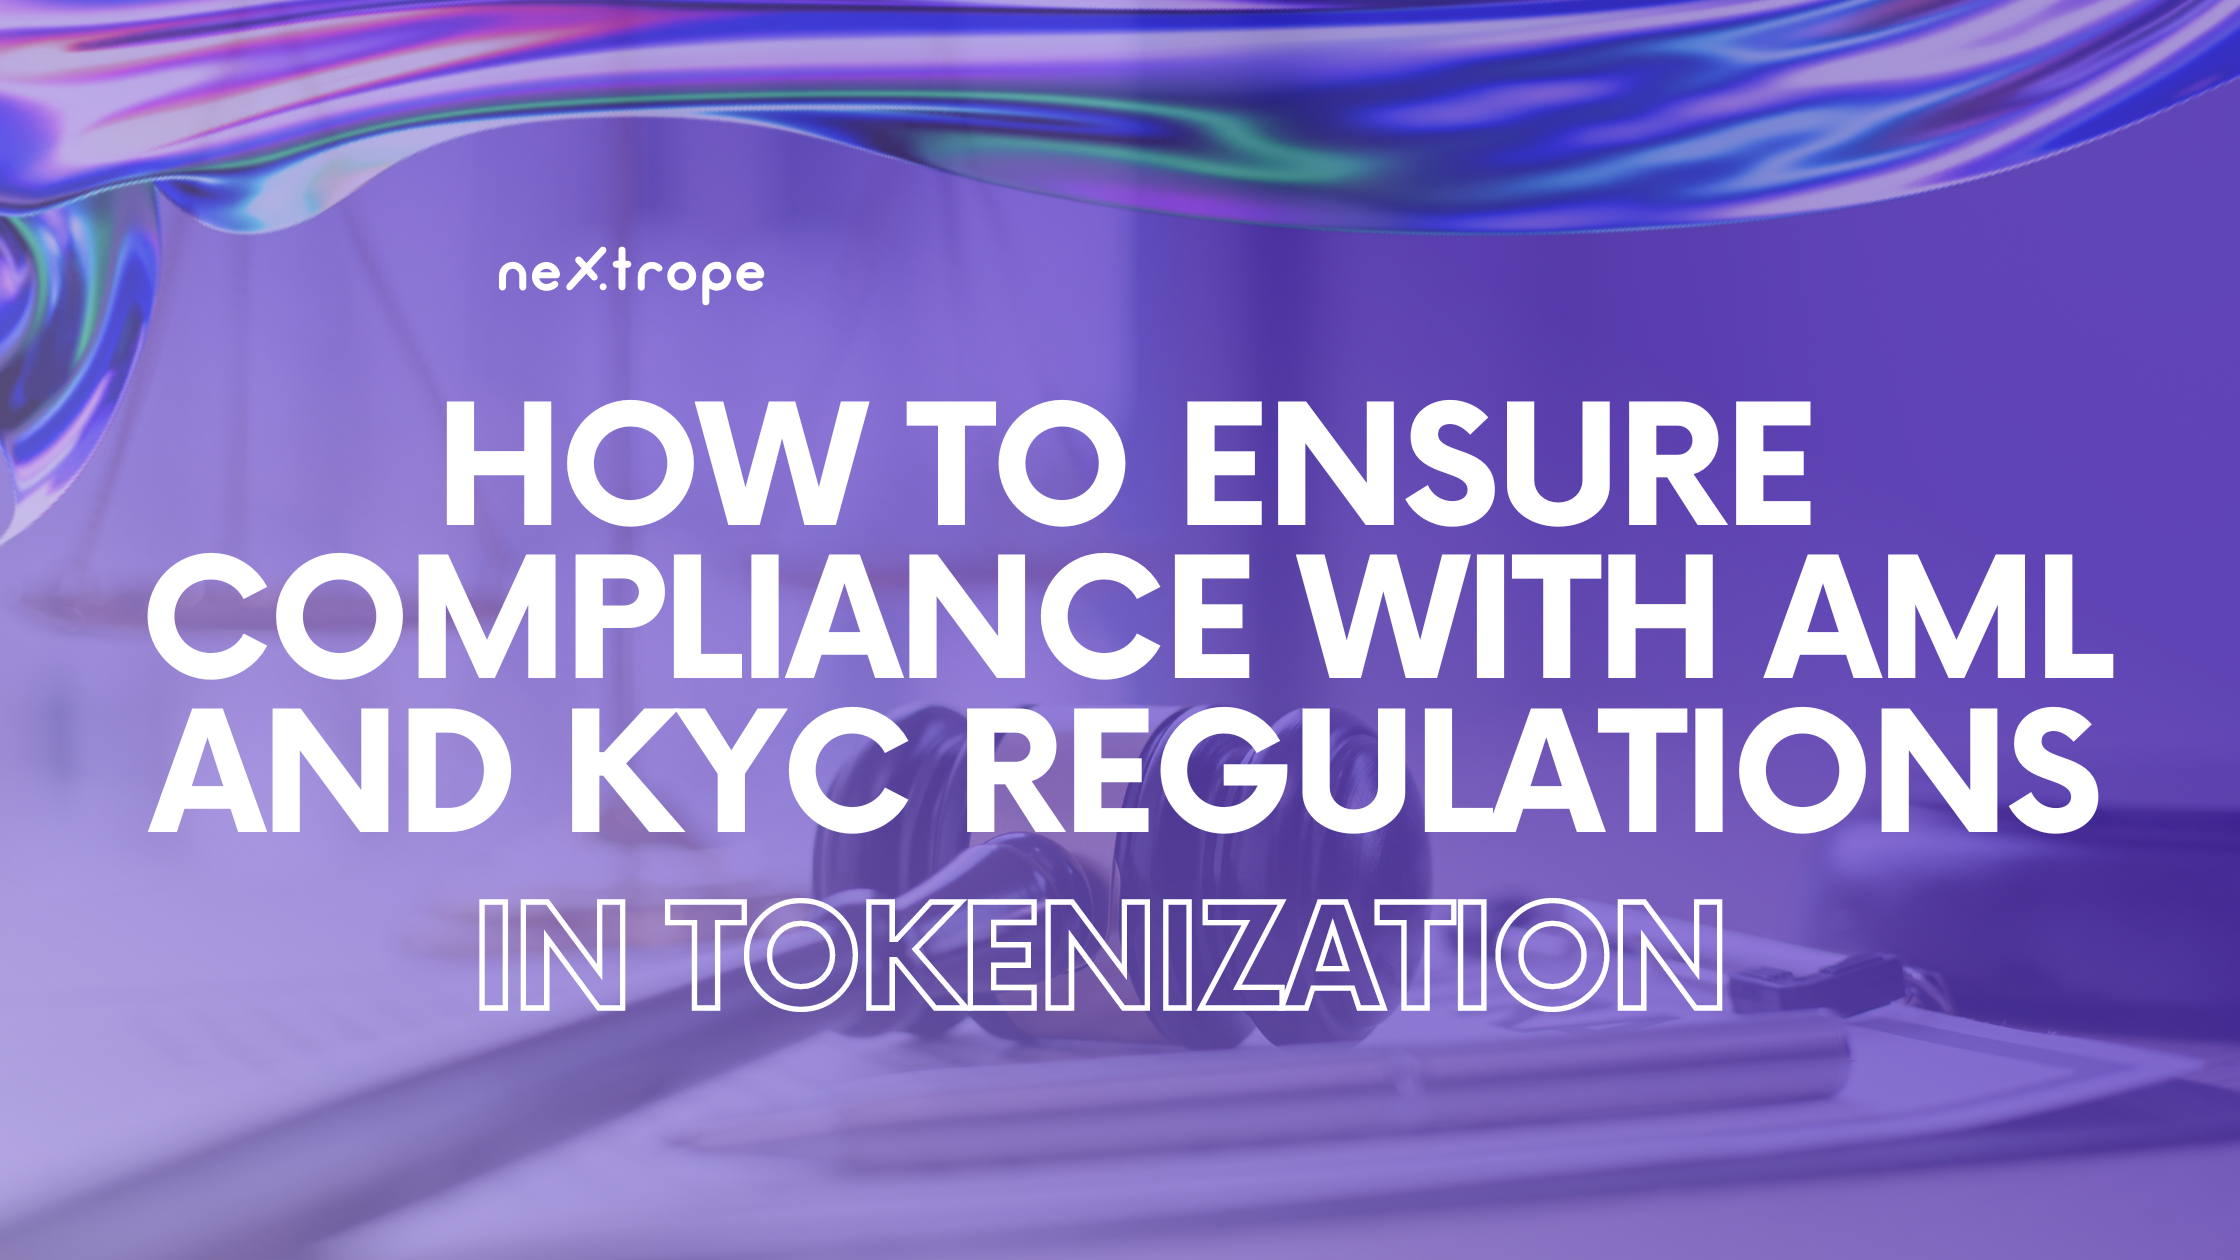 How to Ensure Compliance with Anti-Money Laundering (AML) and Know Your Customer (KYC) Regulations in Tokenization + BONUS: Top 5 KYC Providers!